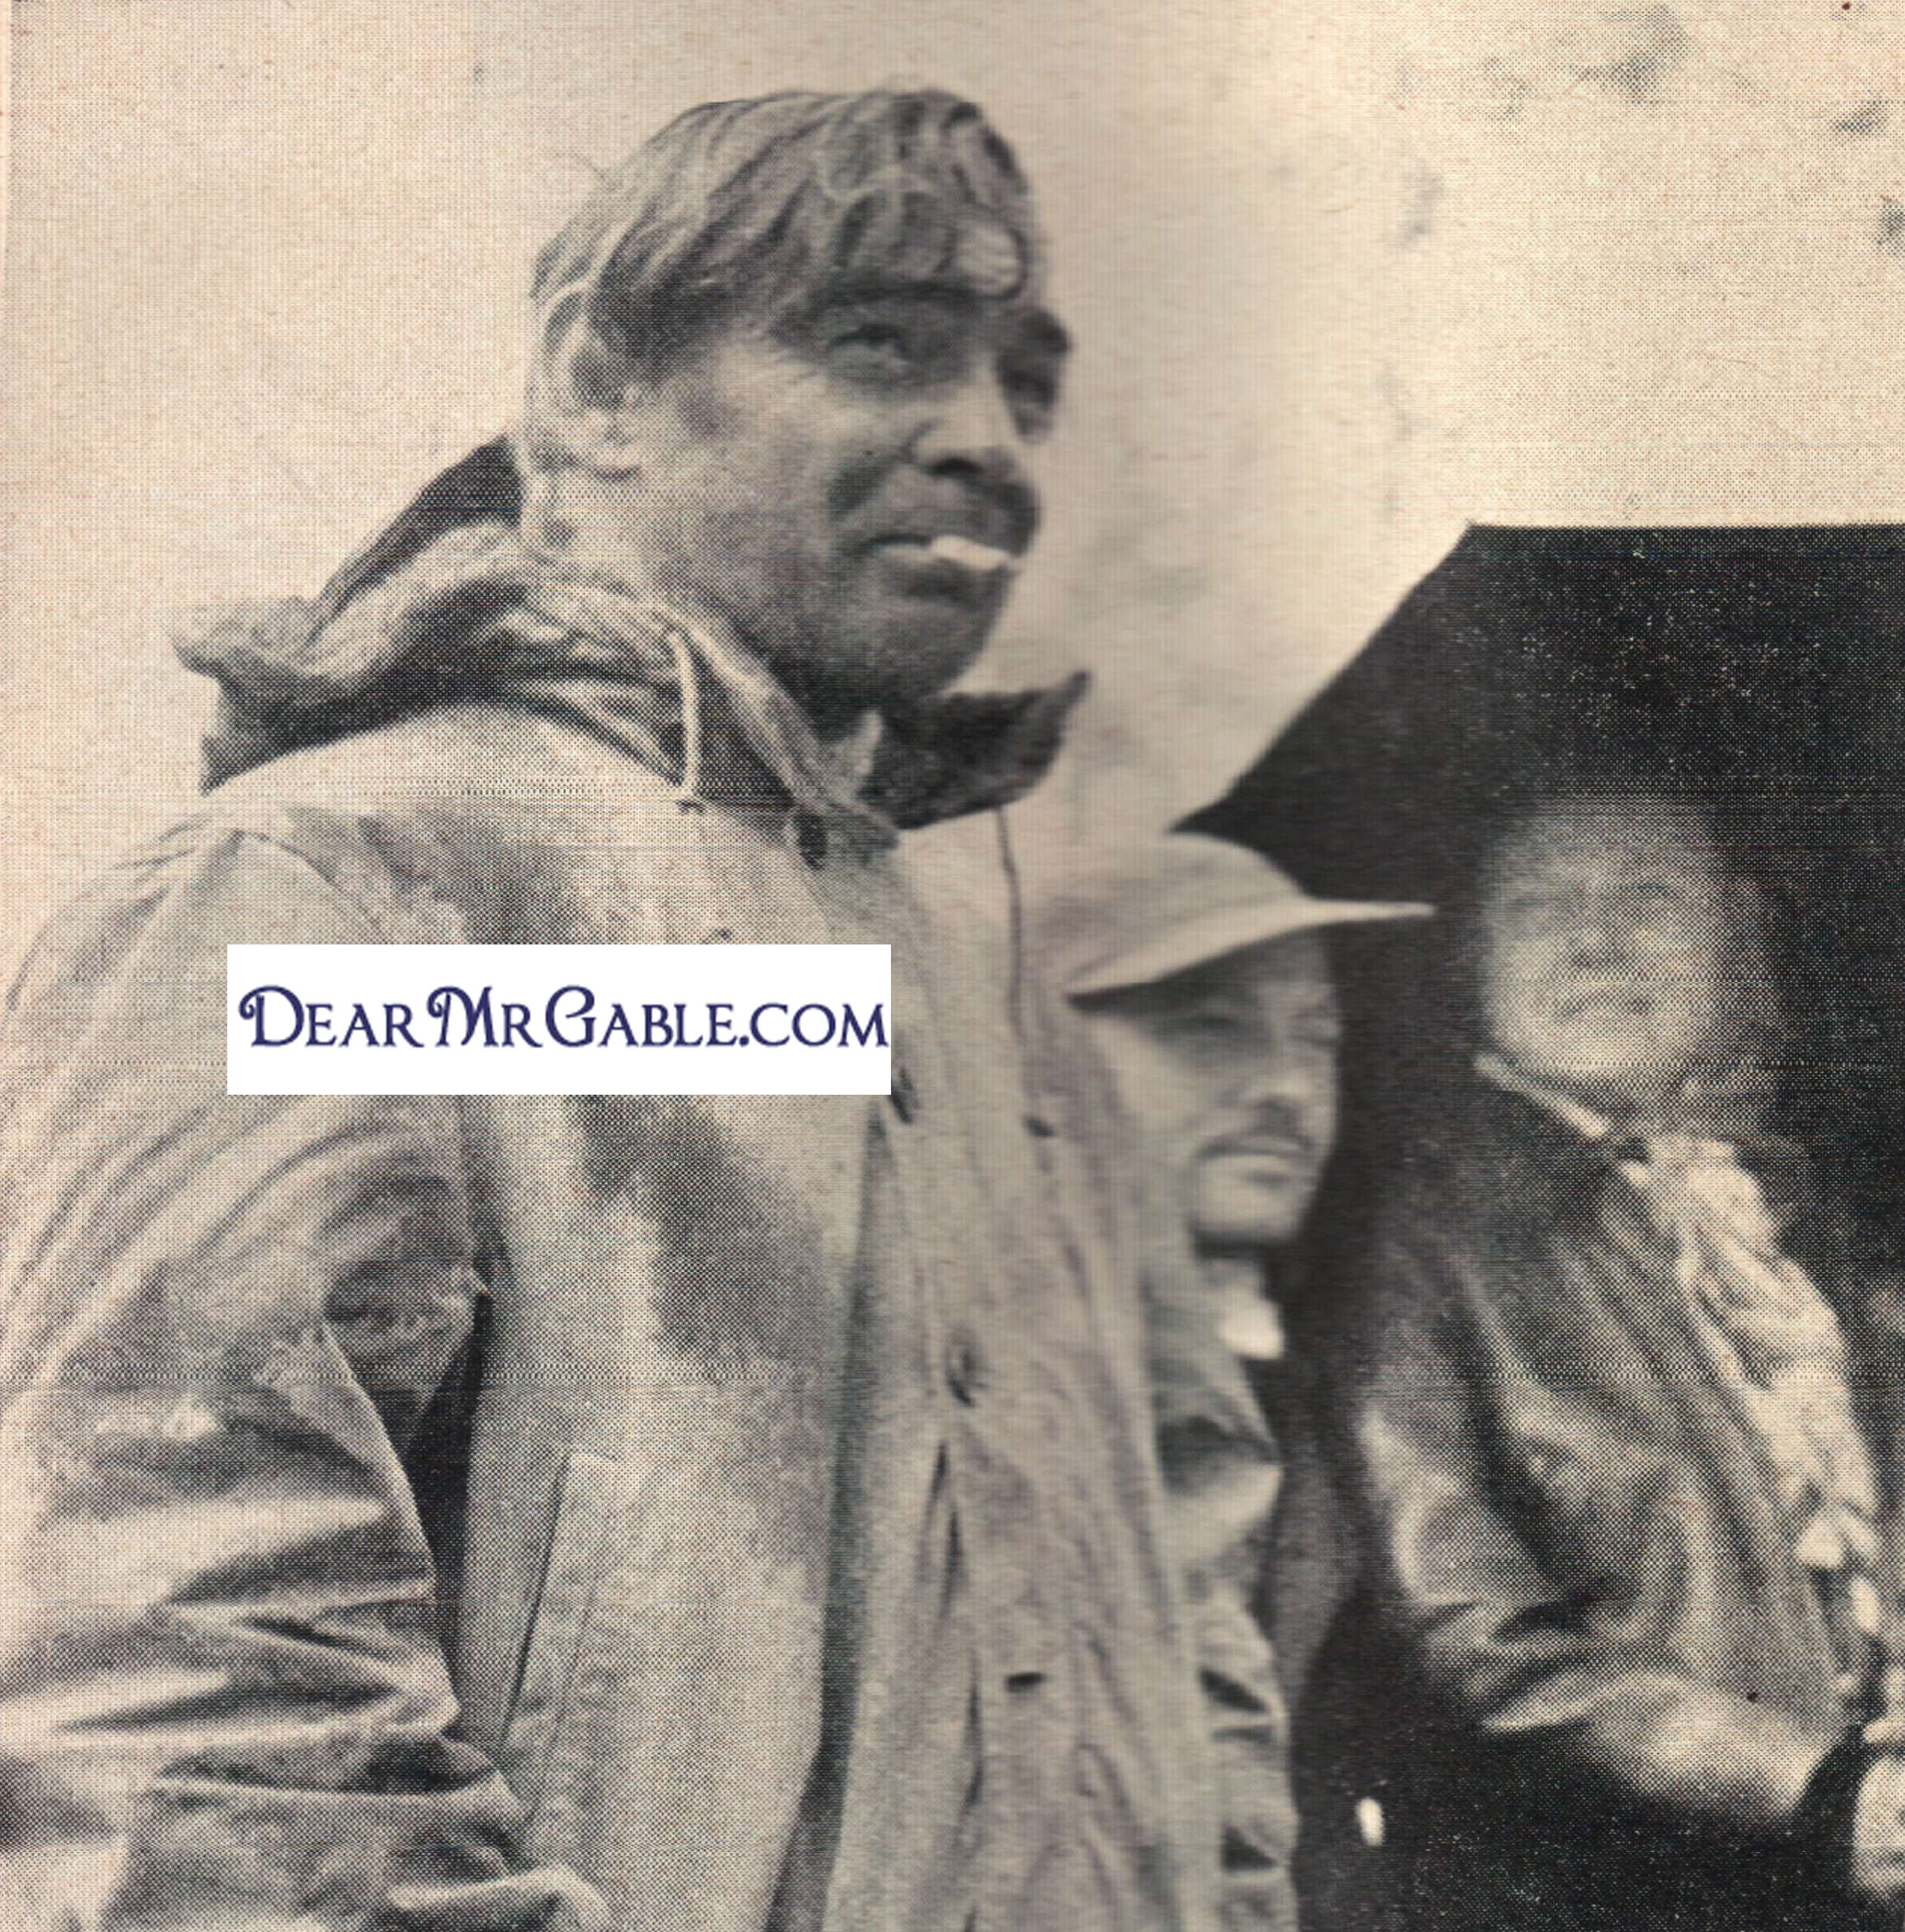 Gable stands out in the rain, waiting for a take, while others take shelter in a tent. The rain is atmosphere for a burial scene.